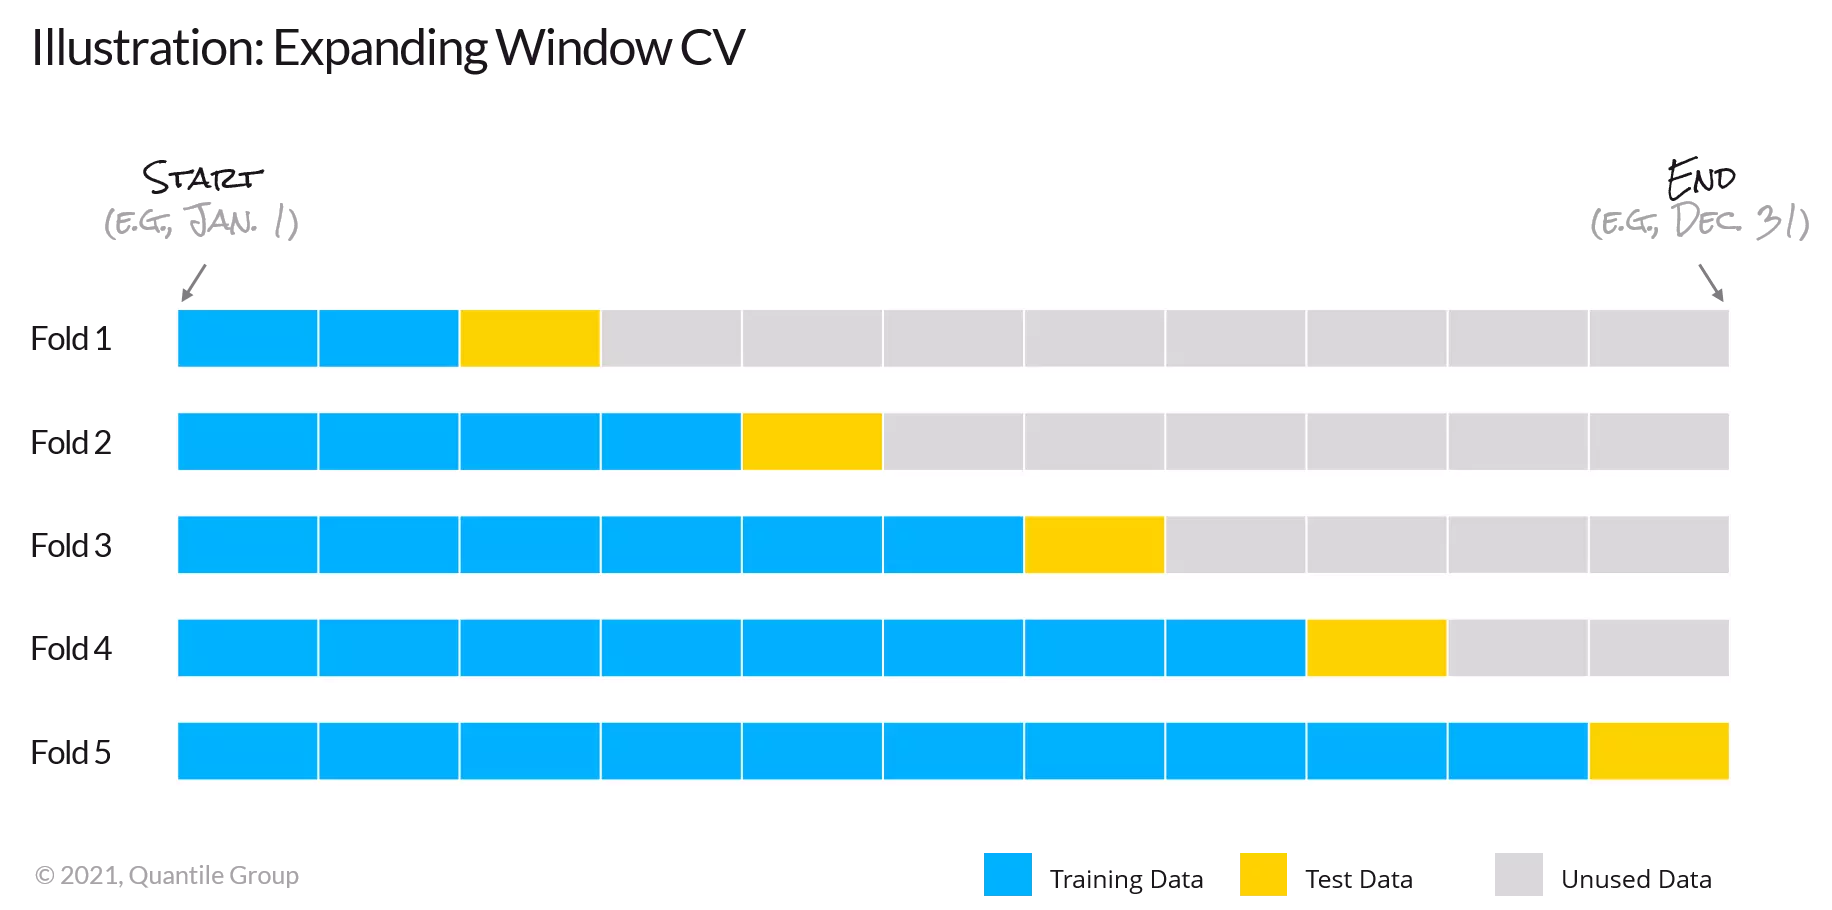 Illustration of expanding window cross-validation for time-series data